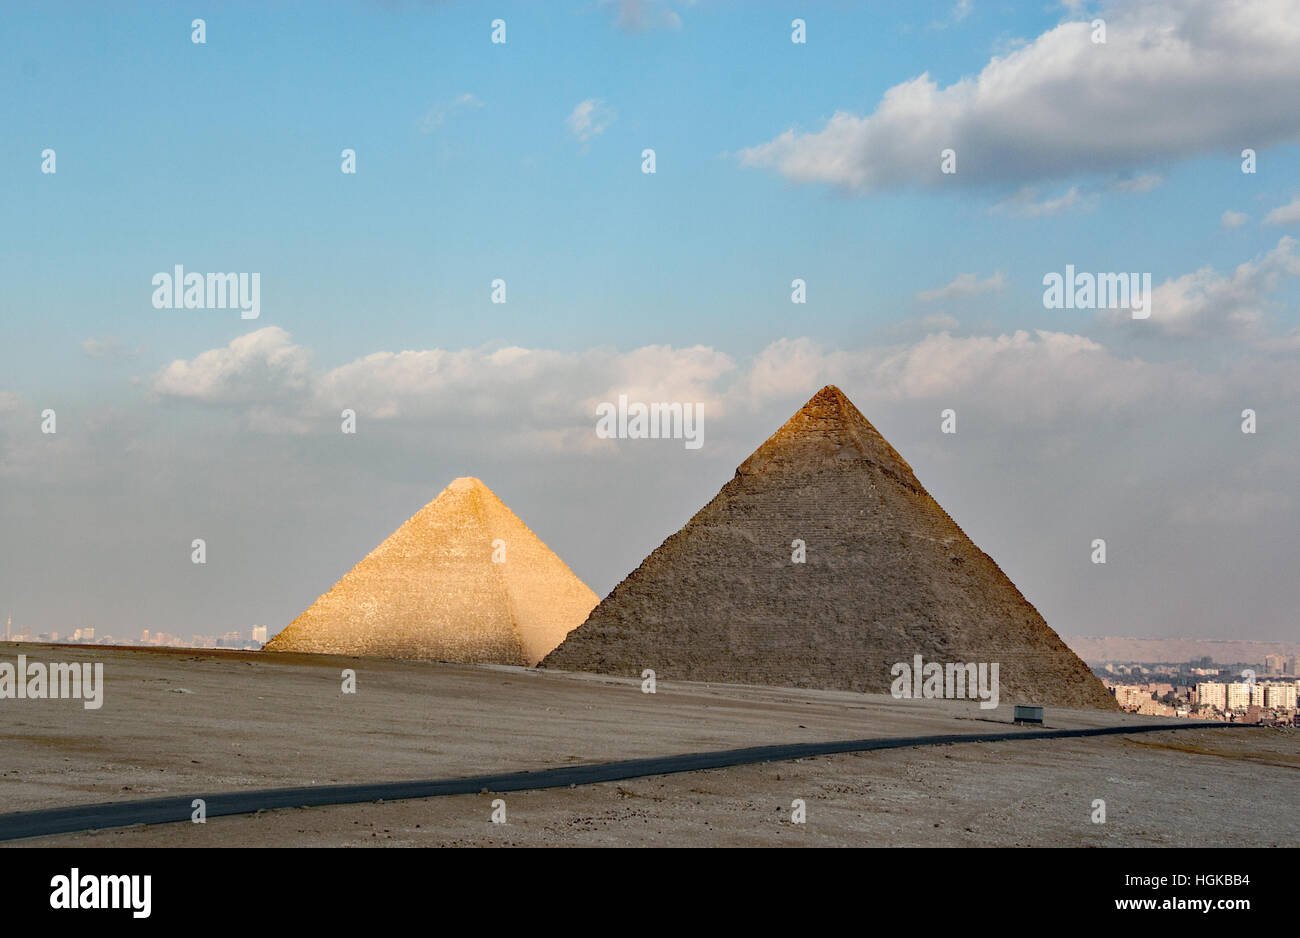 The pyramids of Giza, in southwest part of Cairo, is dominated by the massive pyramids built by 4th dynasty rulers of Egypt. Stock Photo